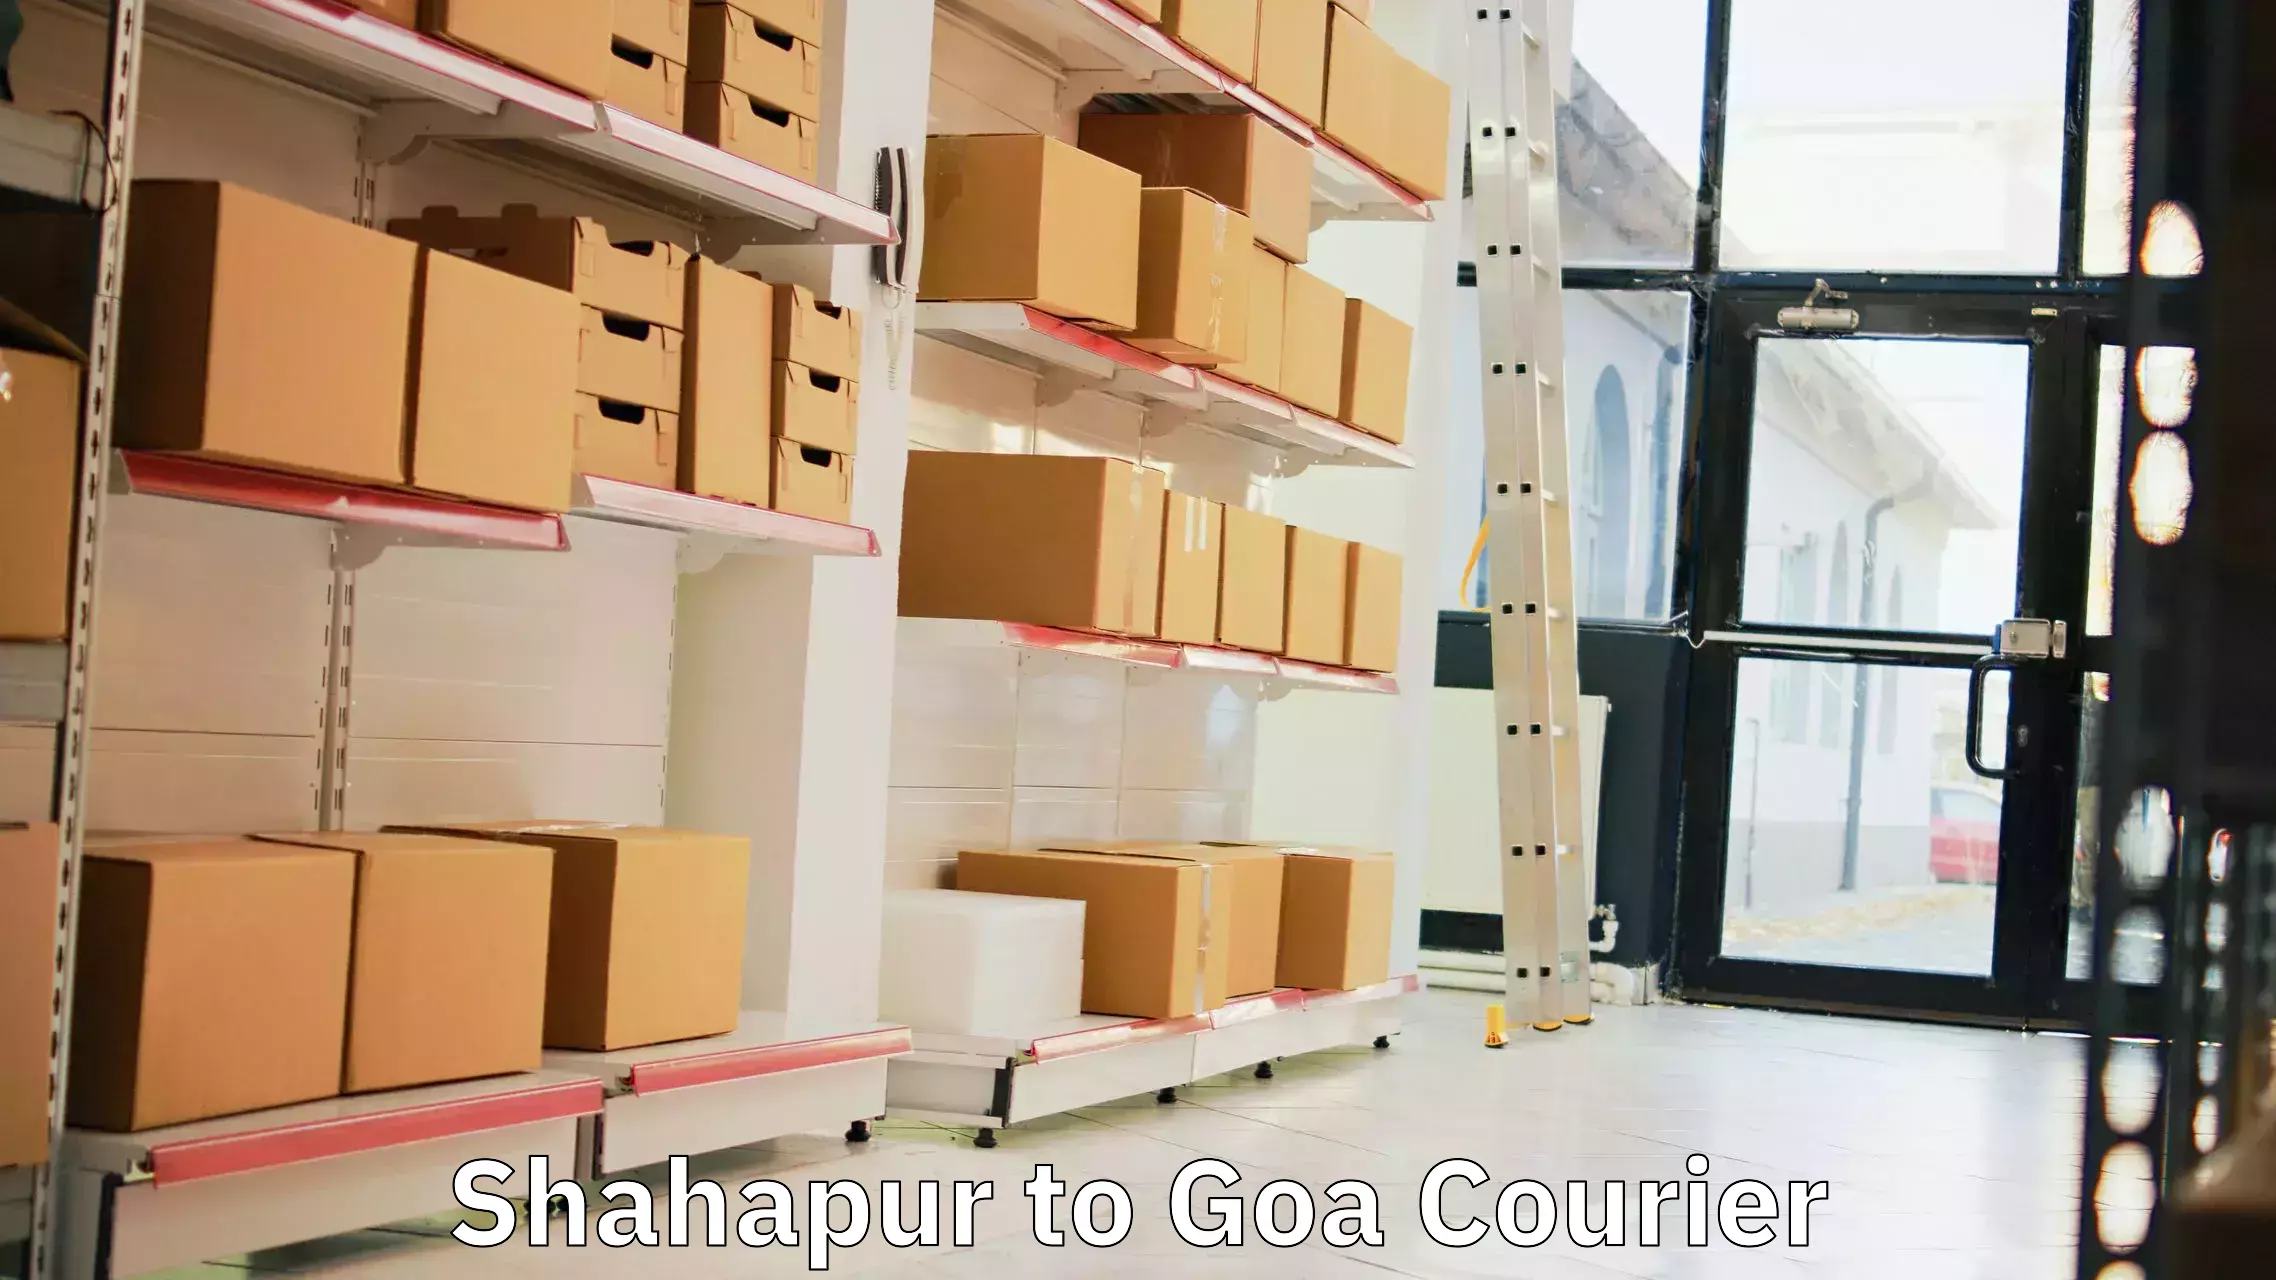 Local courier options Shahapur to Goa